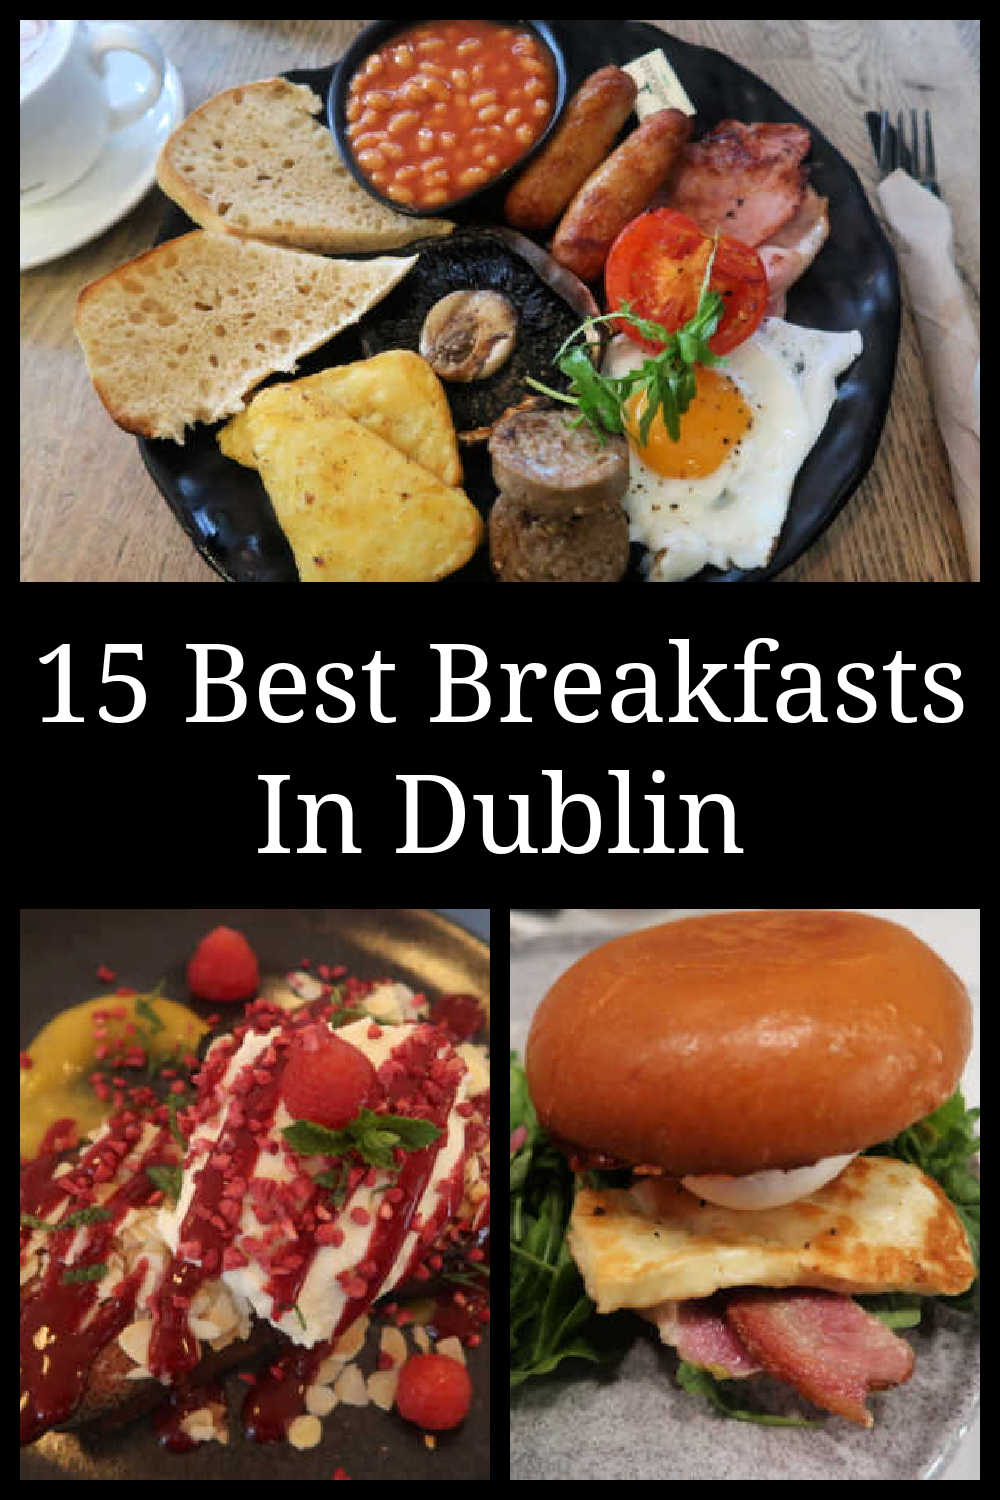 Breakfast in Dublin - Guide to the 15 best places for delicious Irish breakfasts and brunch around Dublin City Centre - with a clickable map.